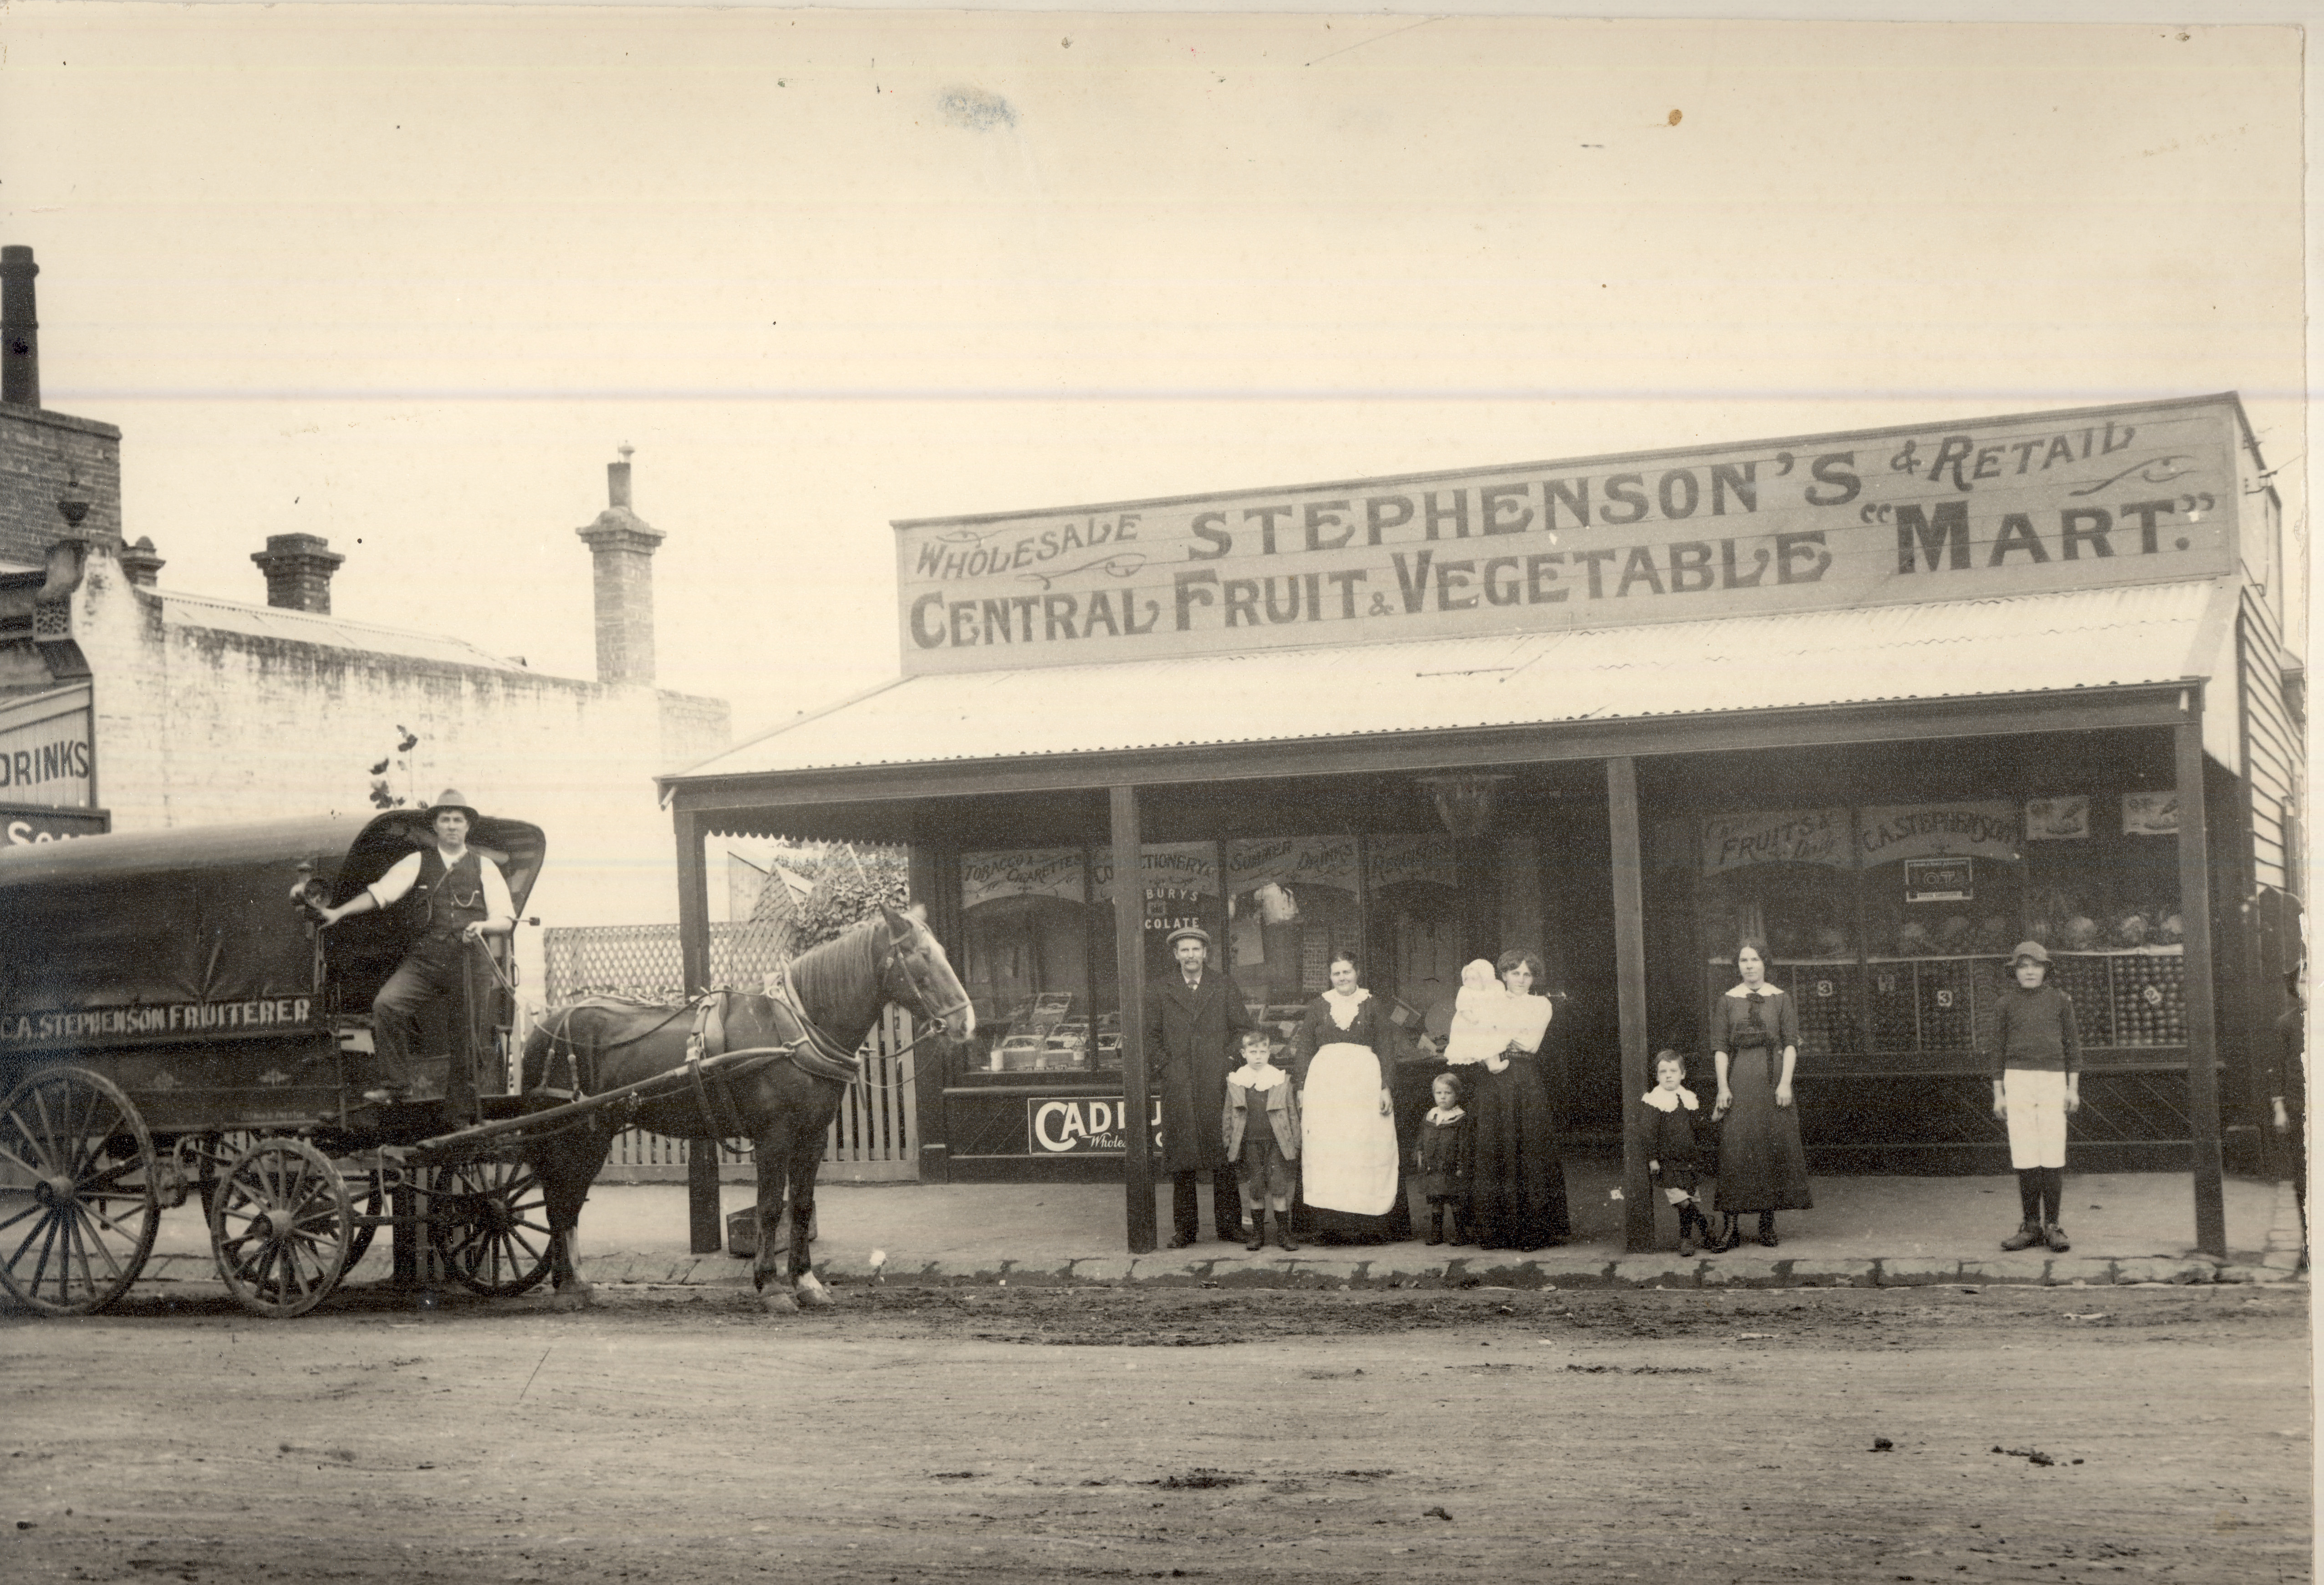 Image of Stephenson's shop and cart. [LHRN4982]